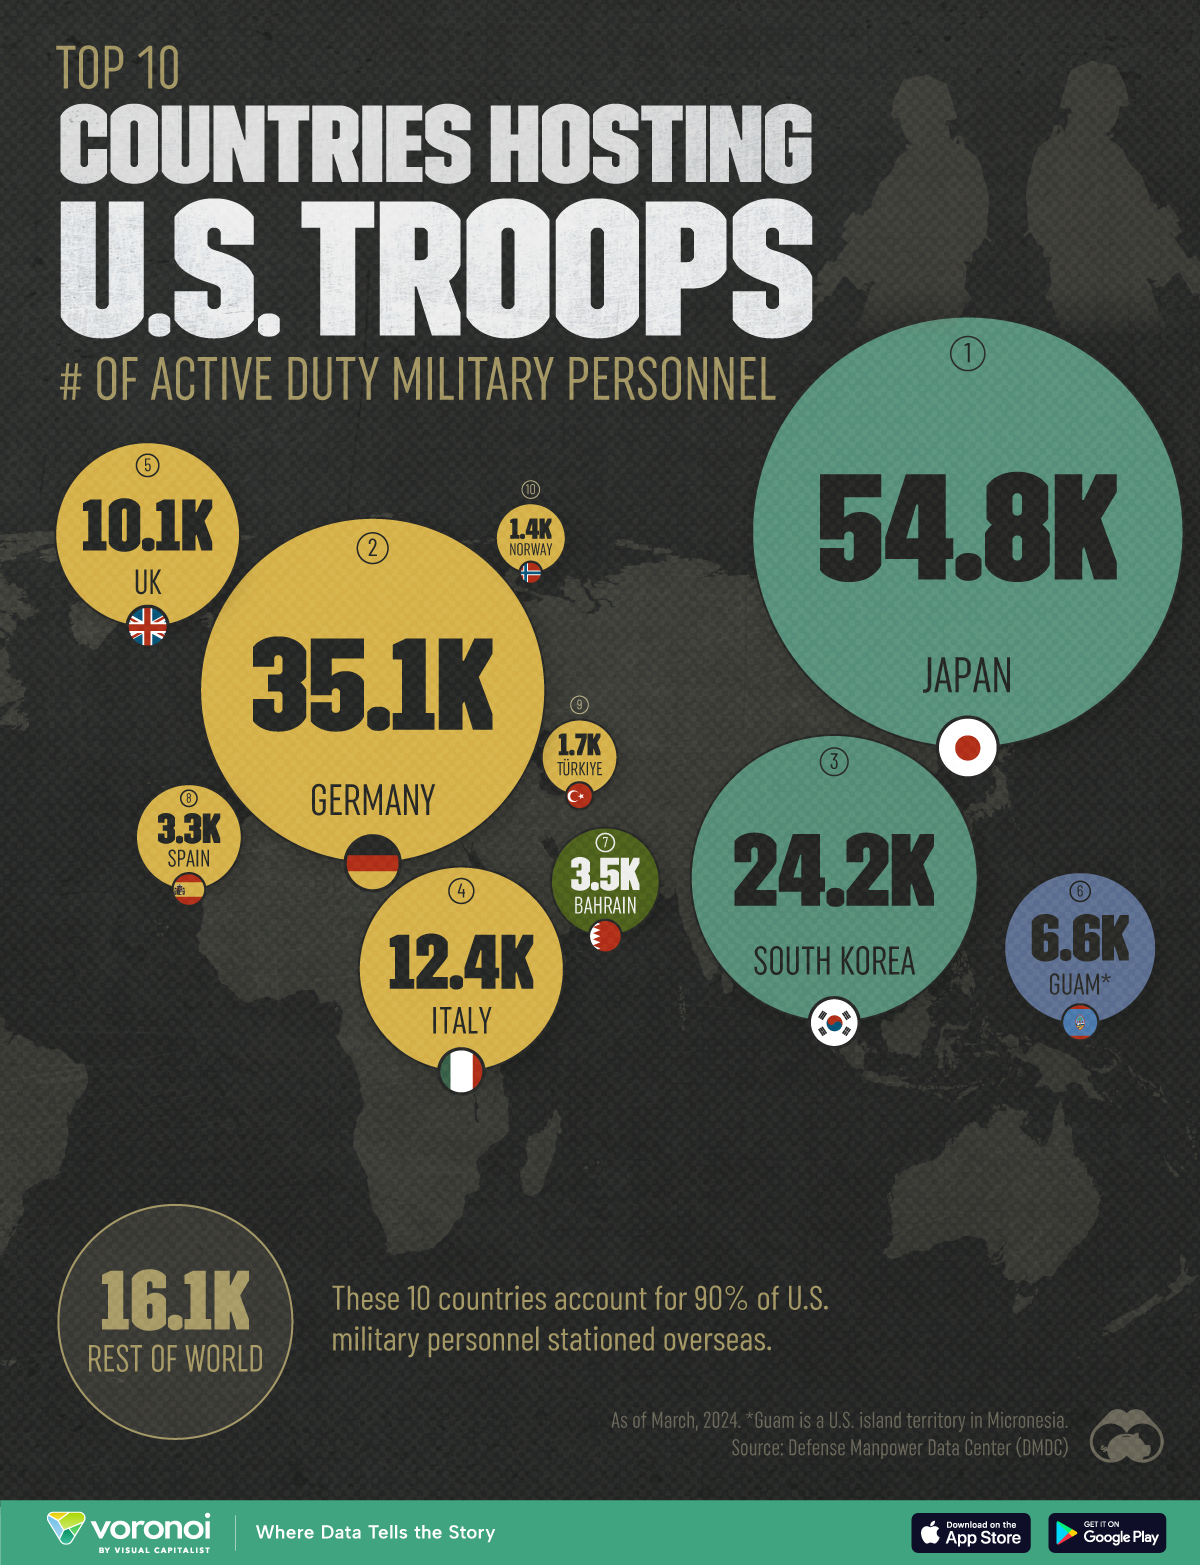 A map with the top 10 territories hosting active duty American troops, according to March, 2024 figures from the Defense Manpower Data Center (DMDC).